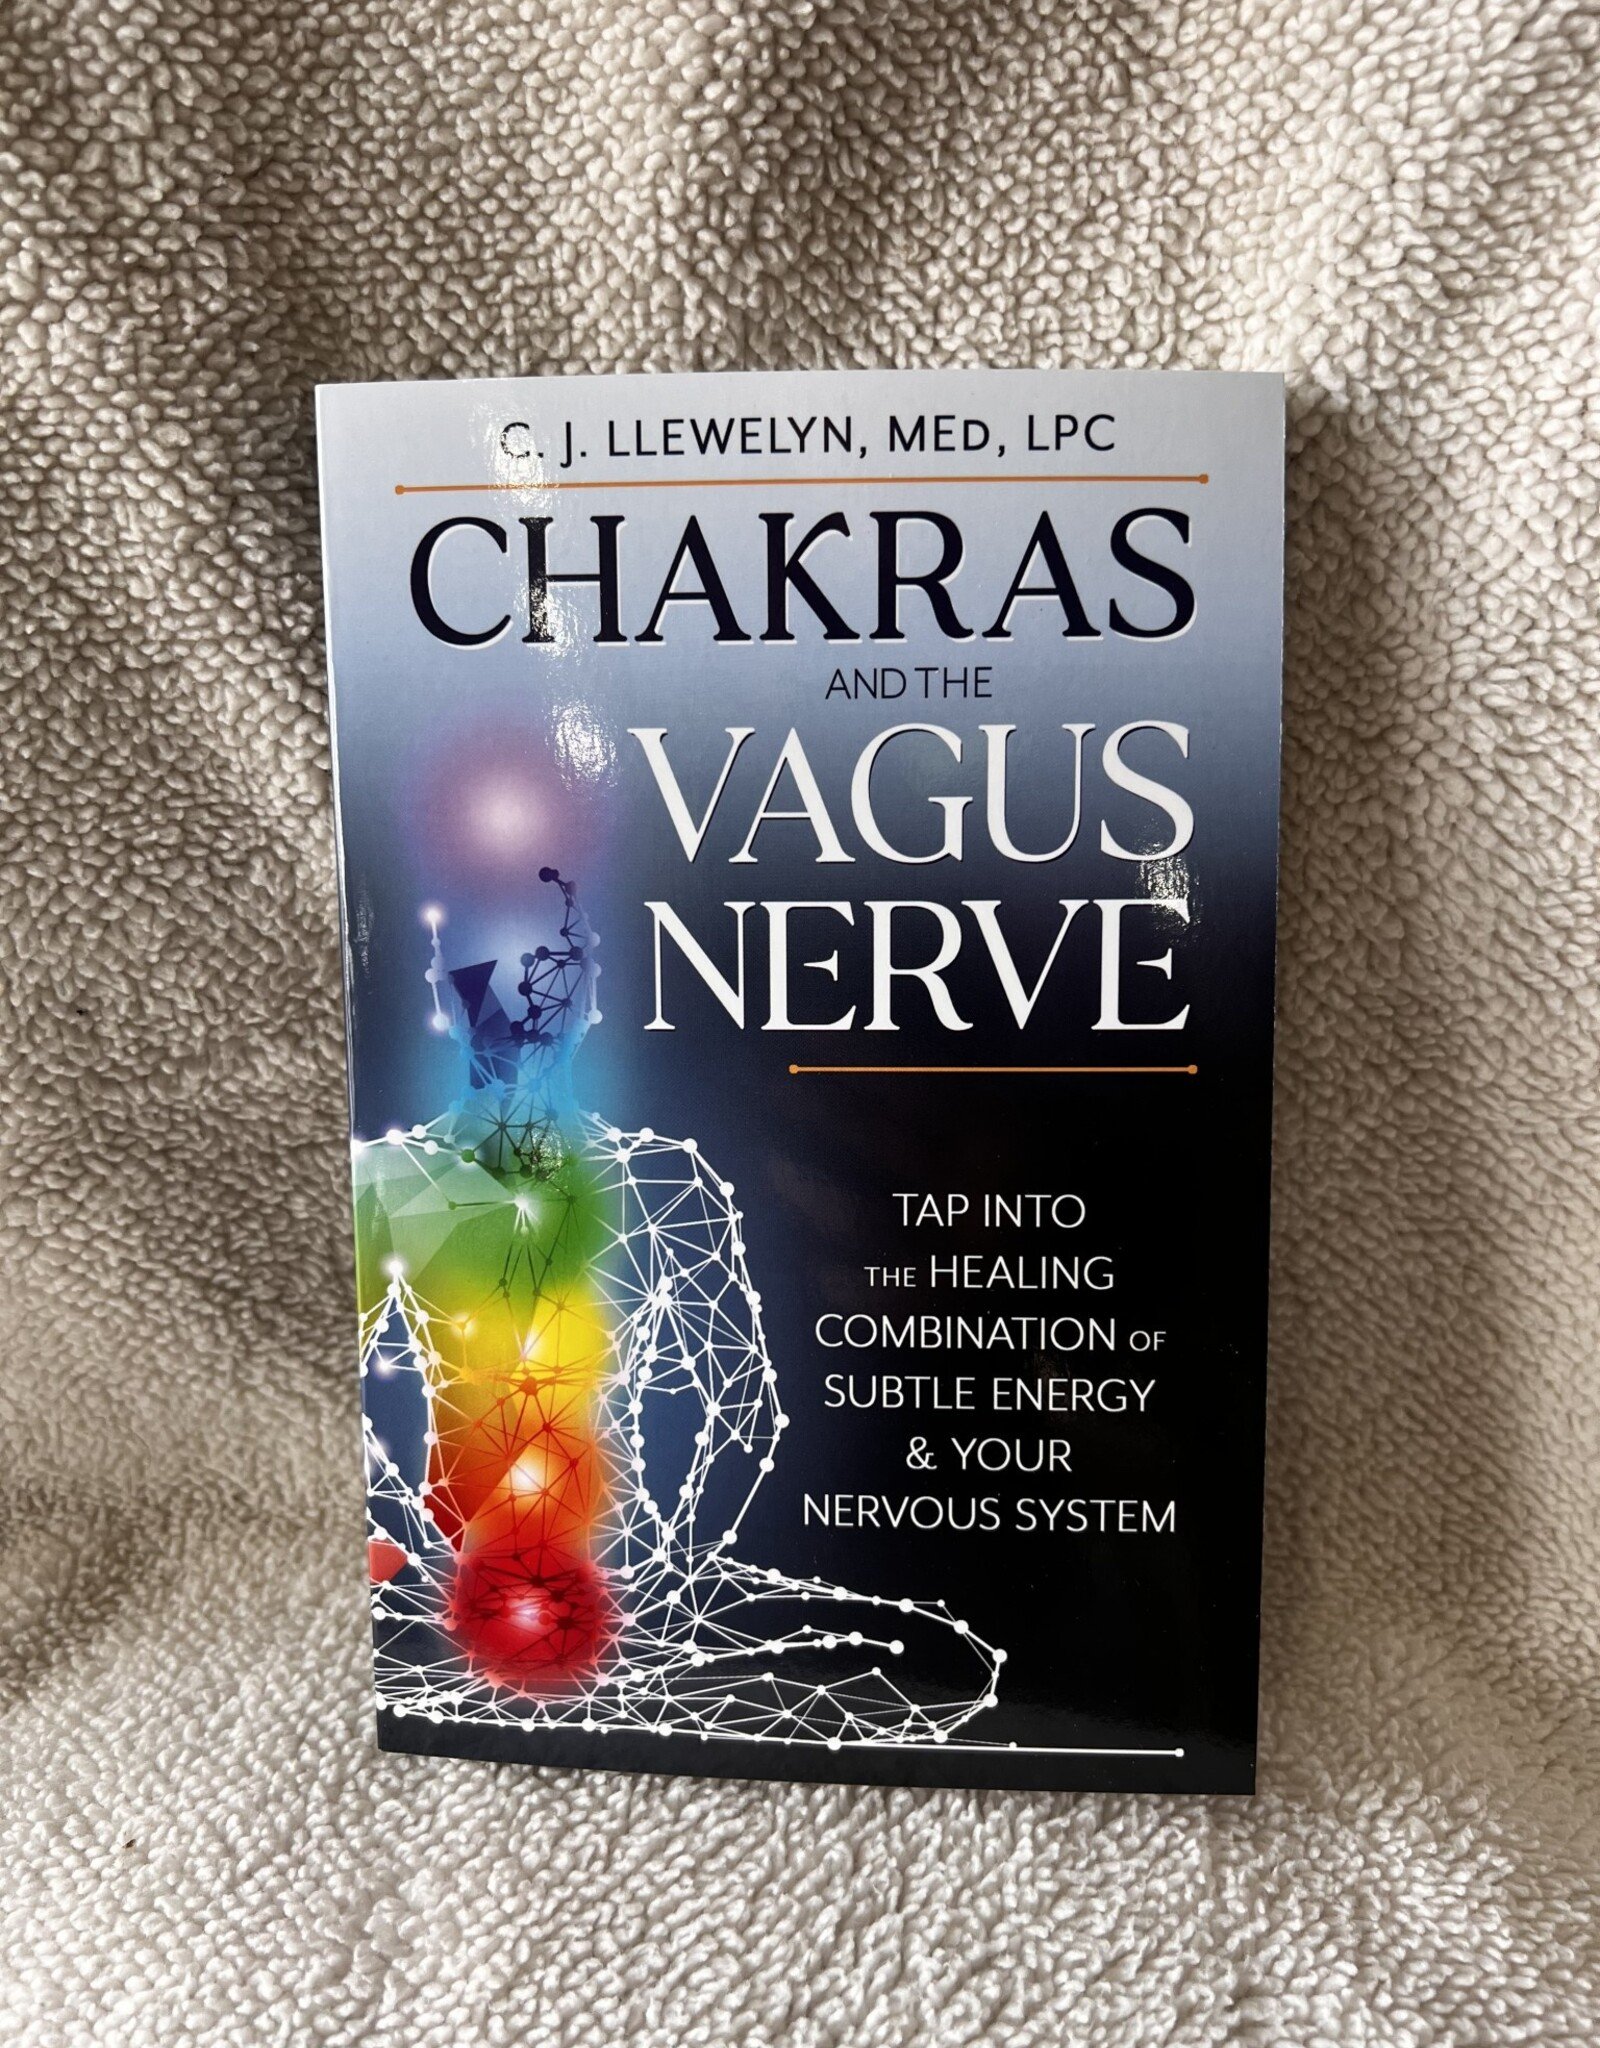 Chakras and the Vagus Nerve by C. J. Llewelyn